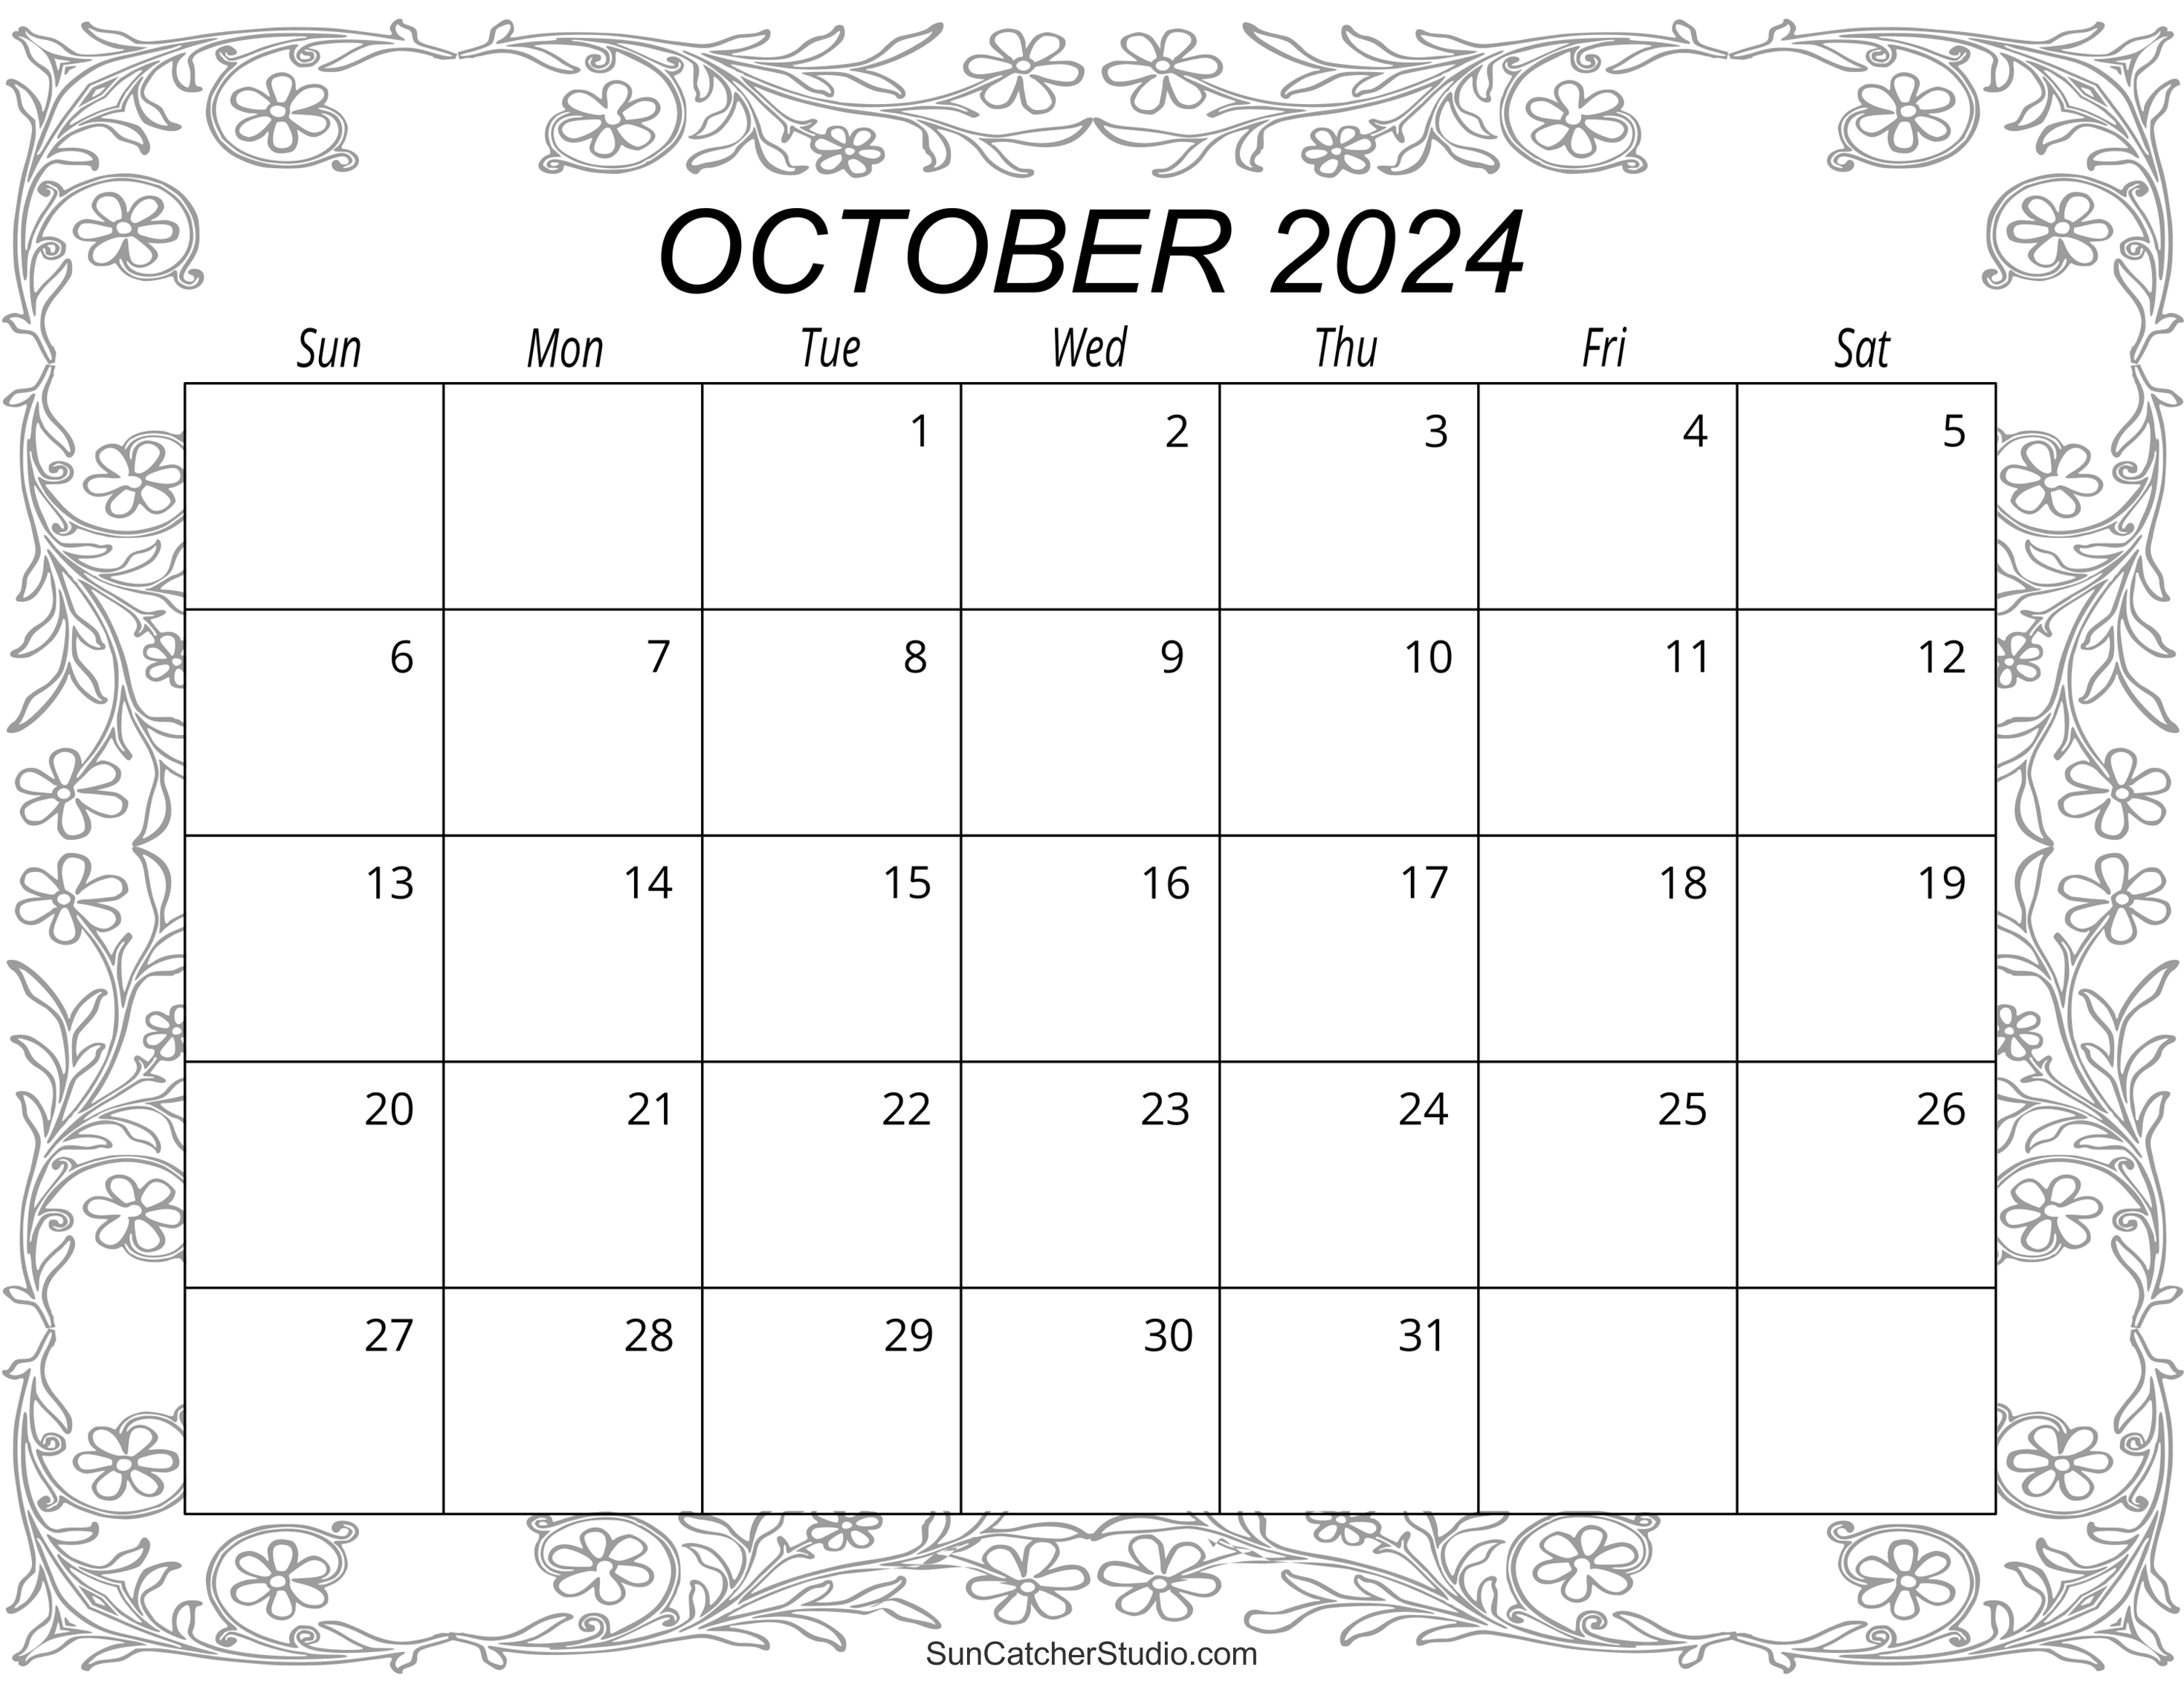 october-2024-calendar-free-printable-diy-projects-patterns